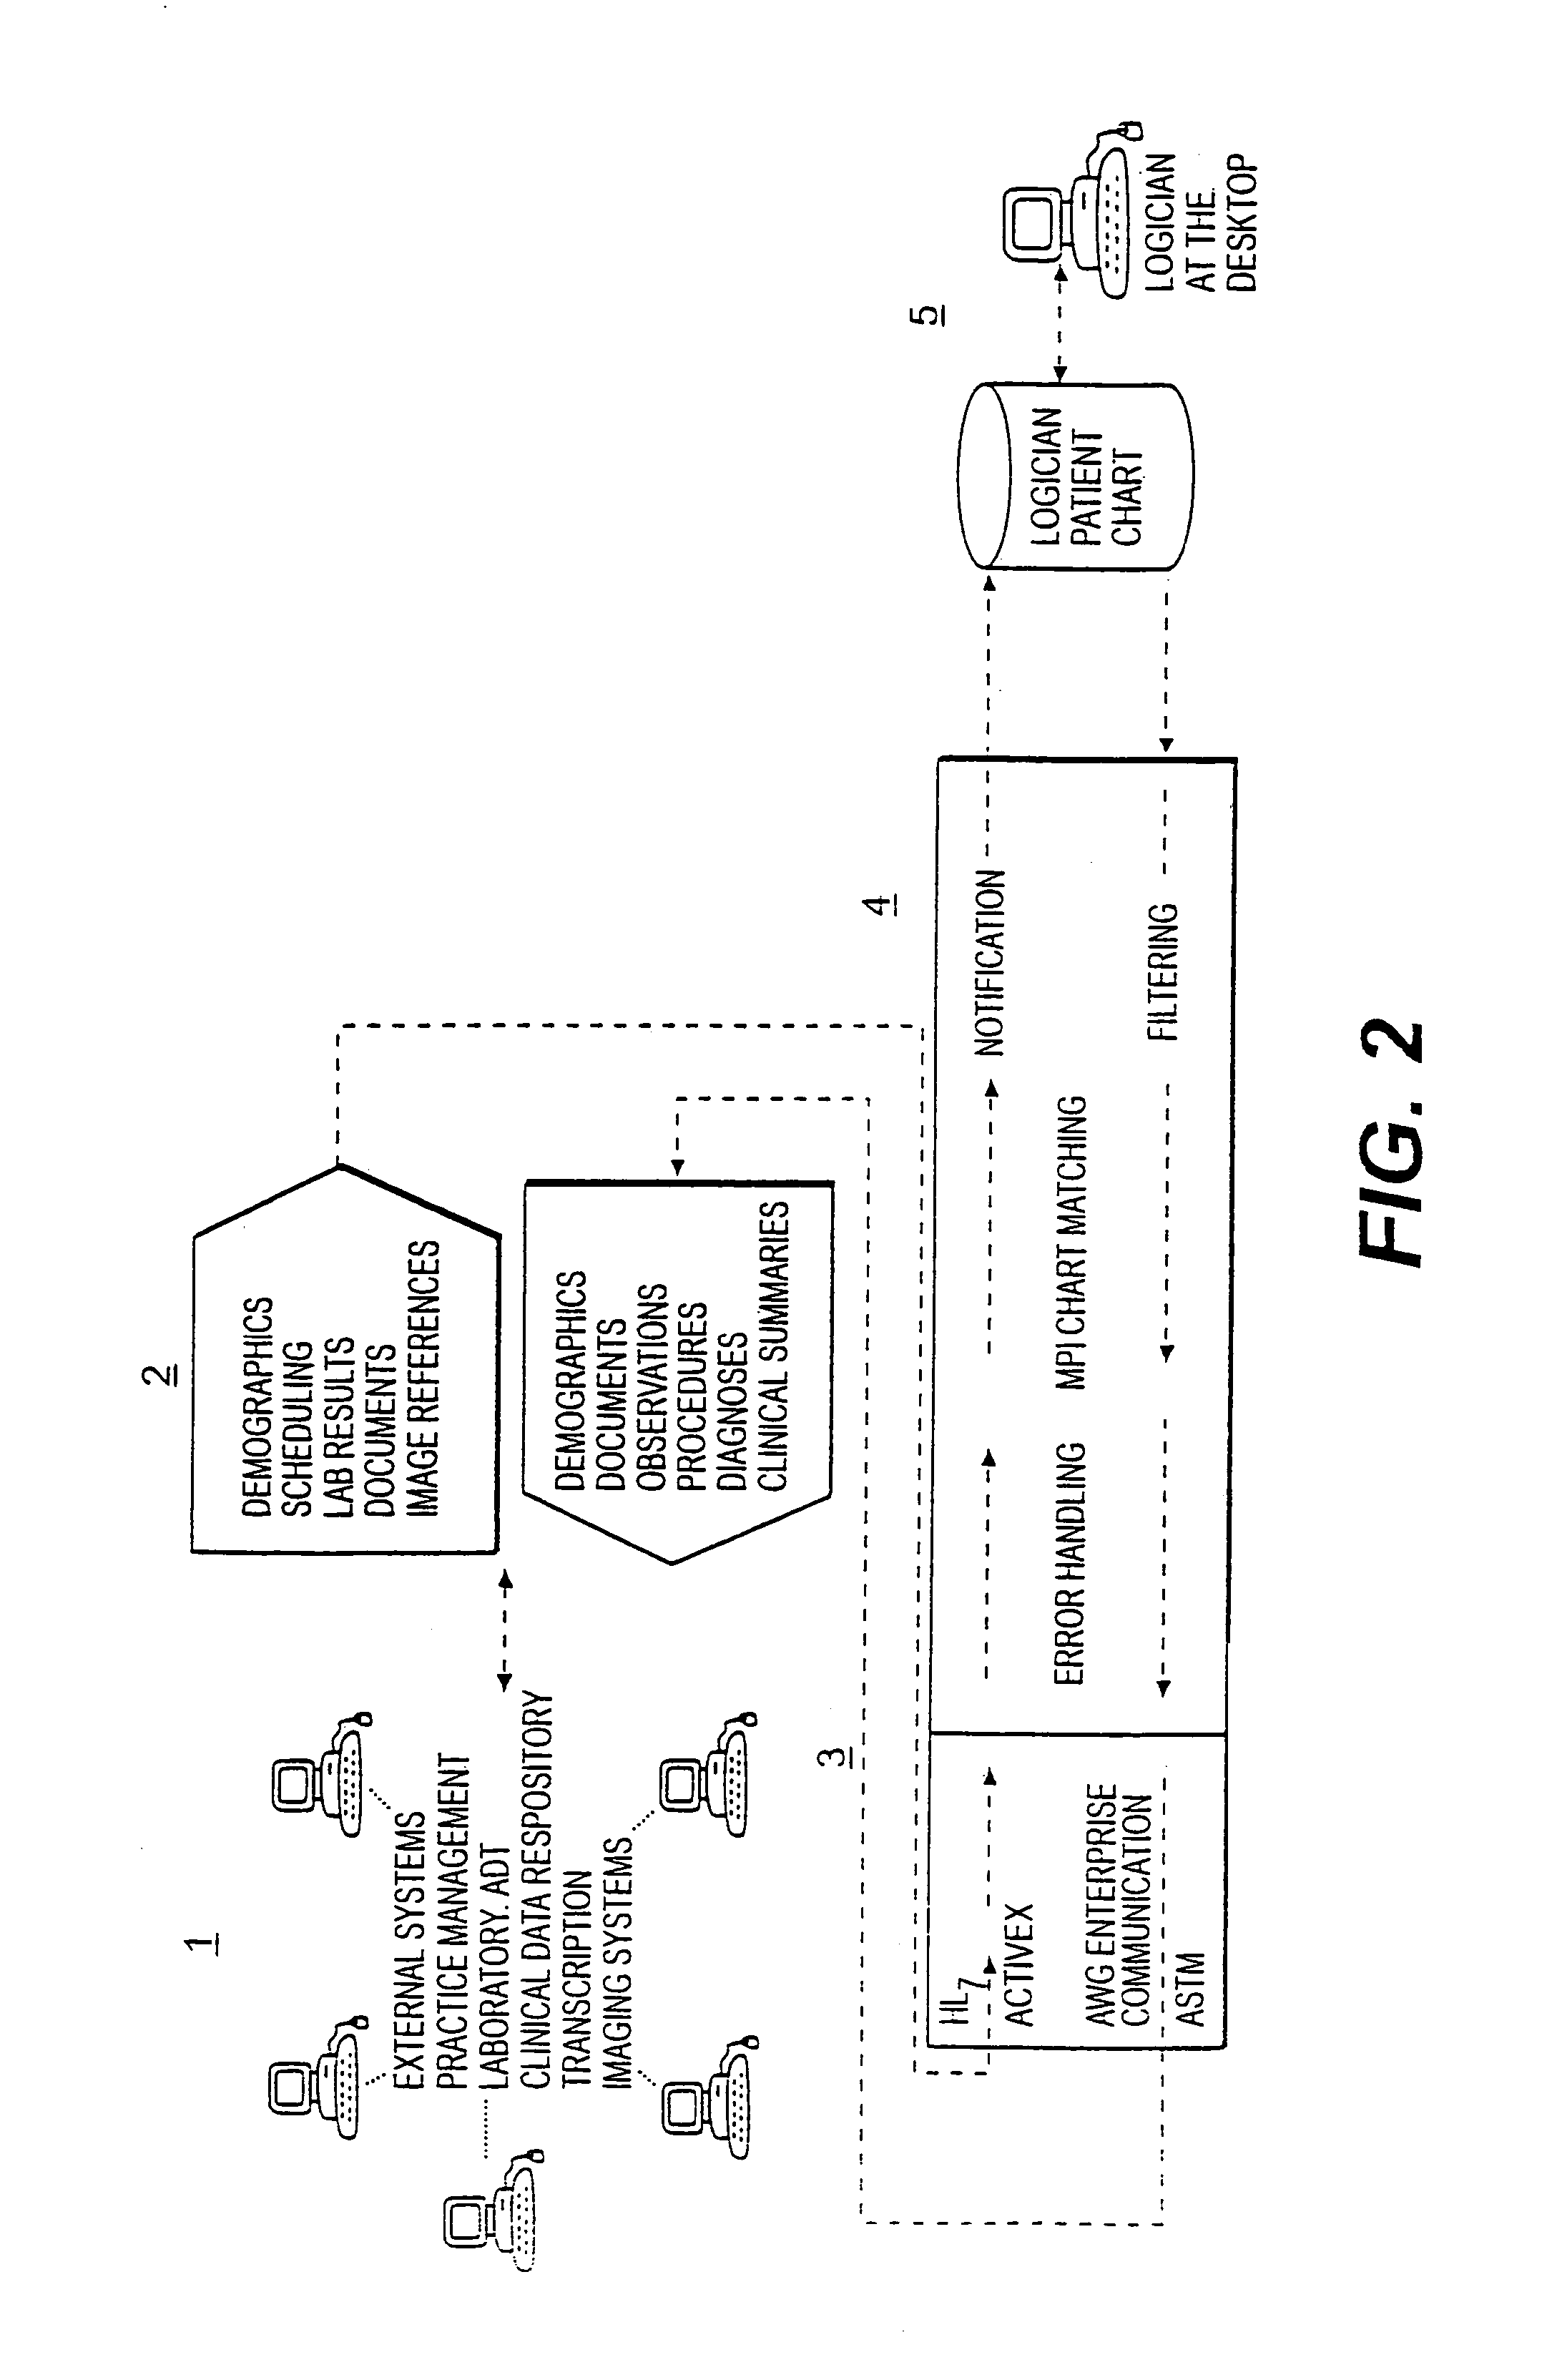 Input devices for entering data into an electronic medical record (EMR)